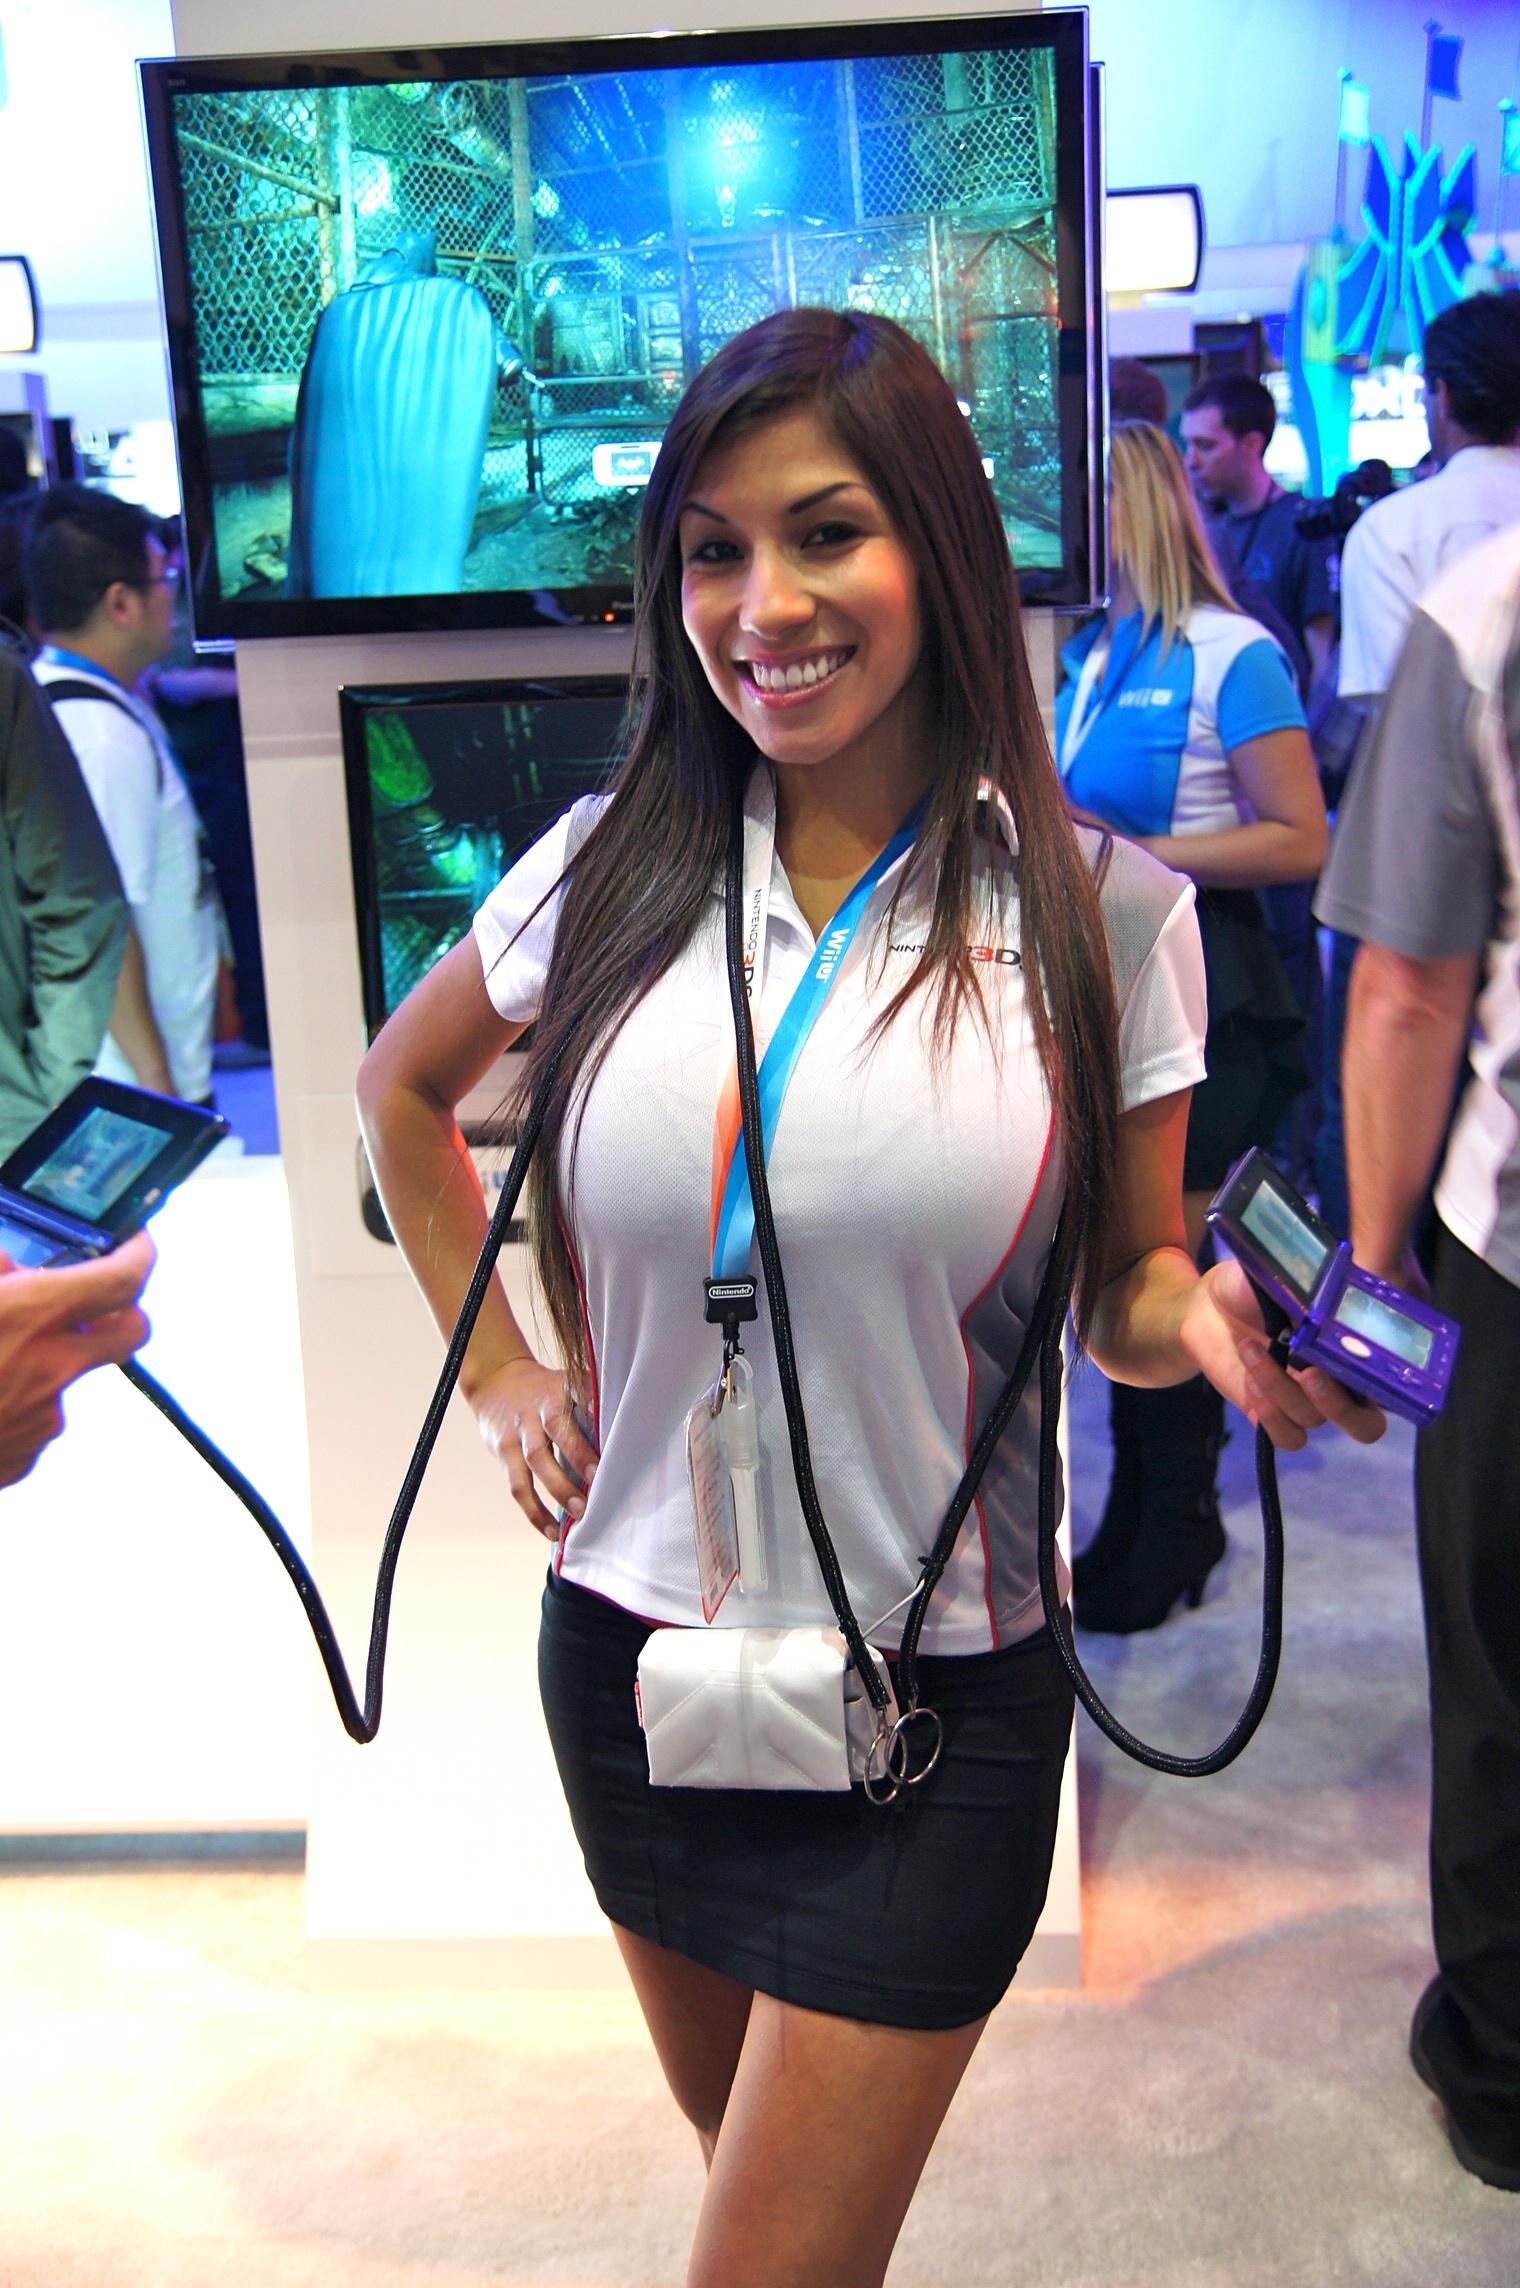 the young woman is standing next to an enormous monitor